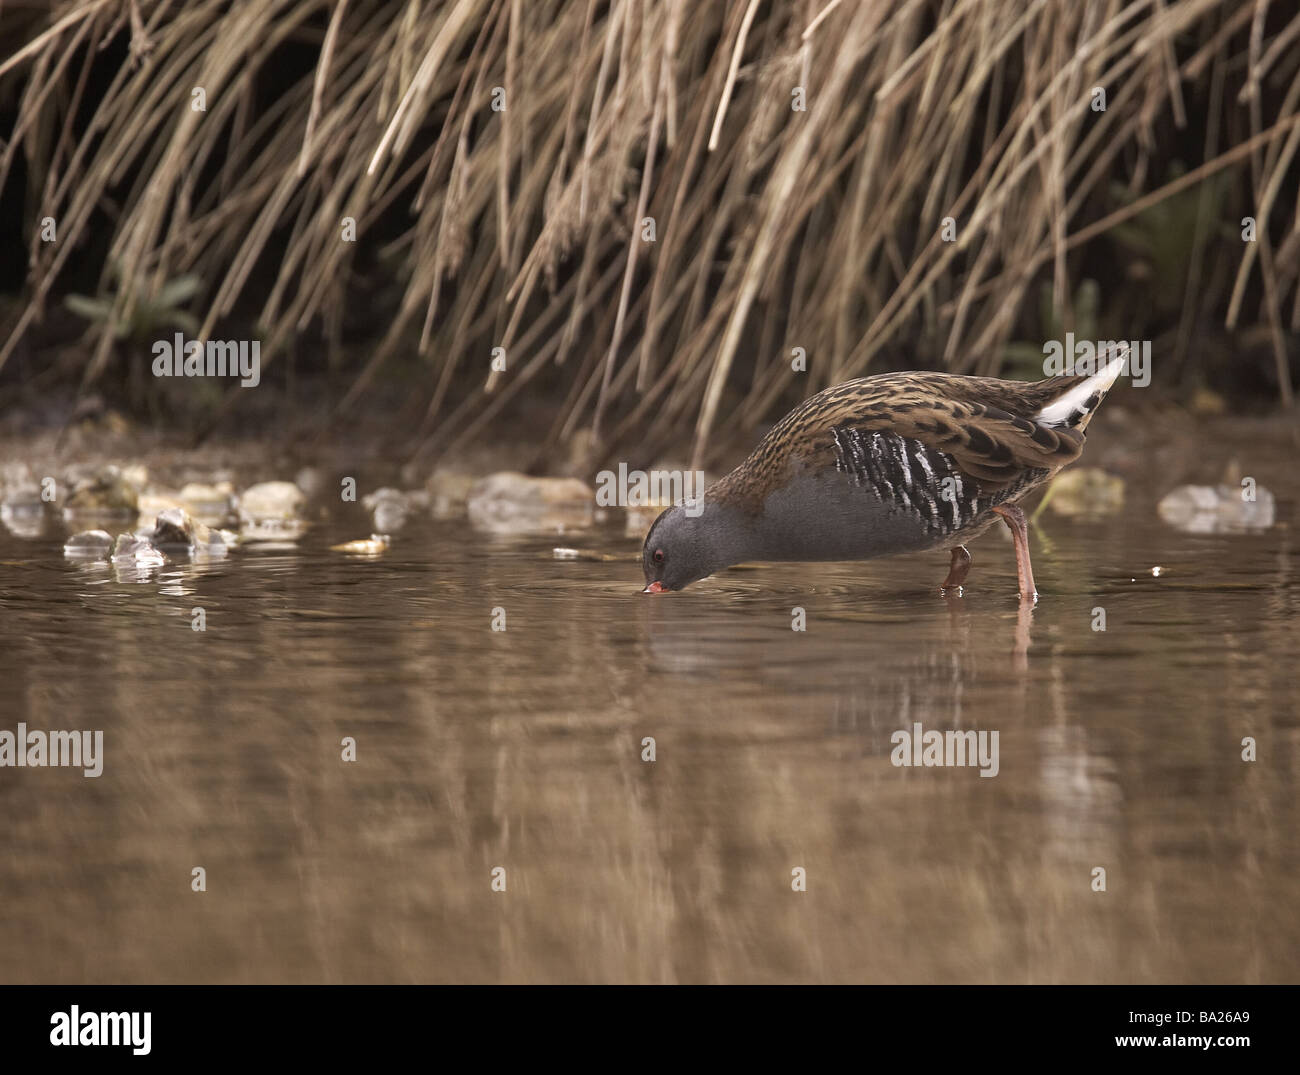 Water rail Aquaticus rallus bird searching for food Photographed on Millington pond The Wolds East Yorkshire UK Stock Photo